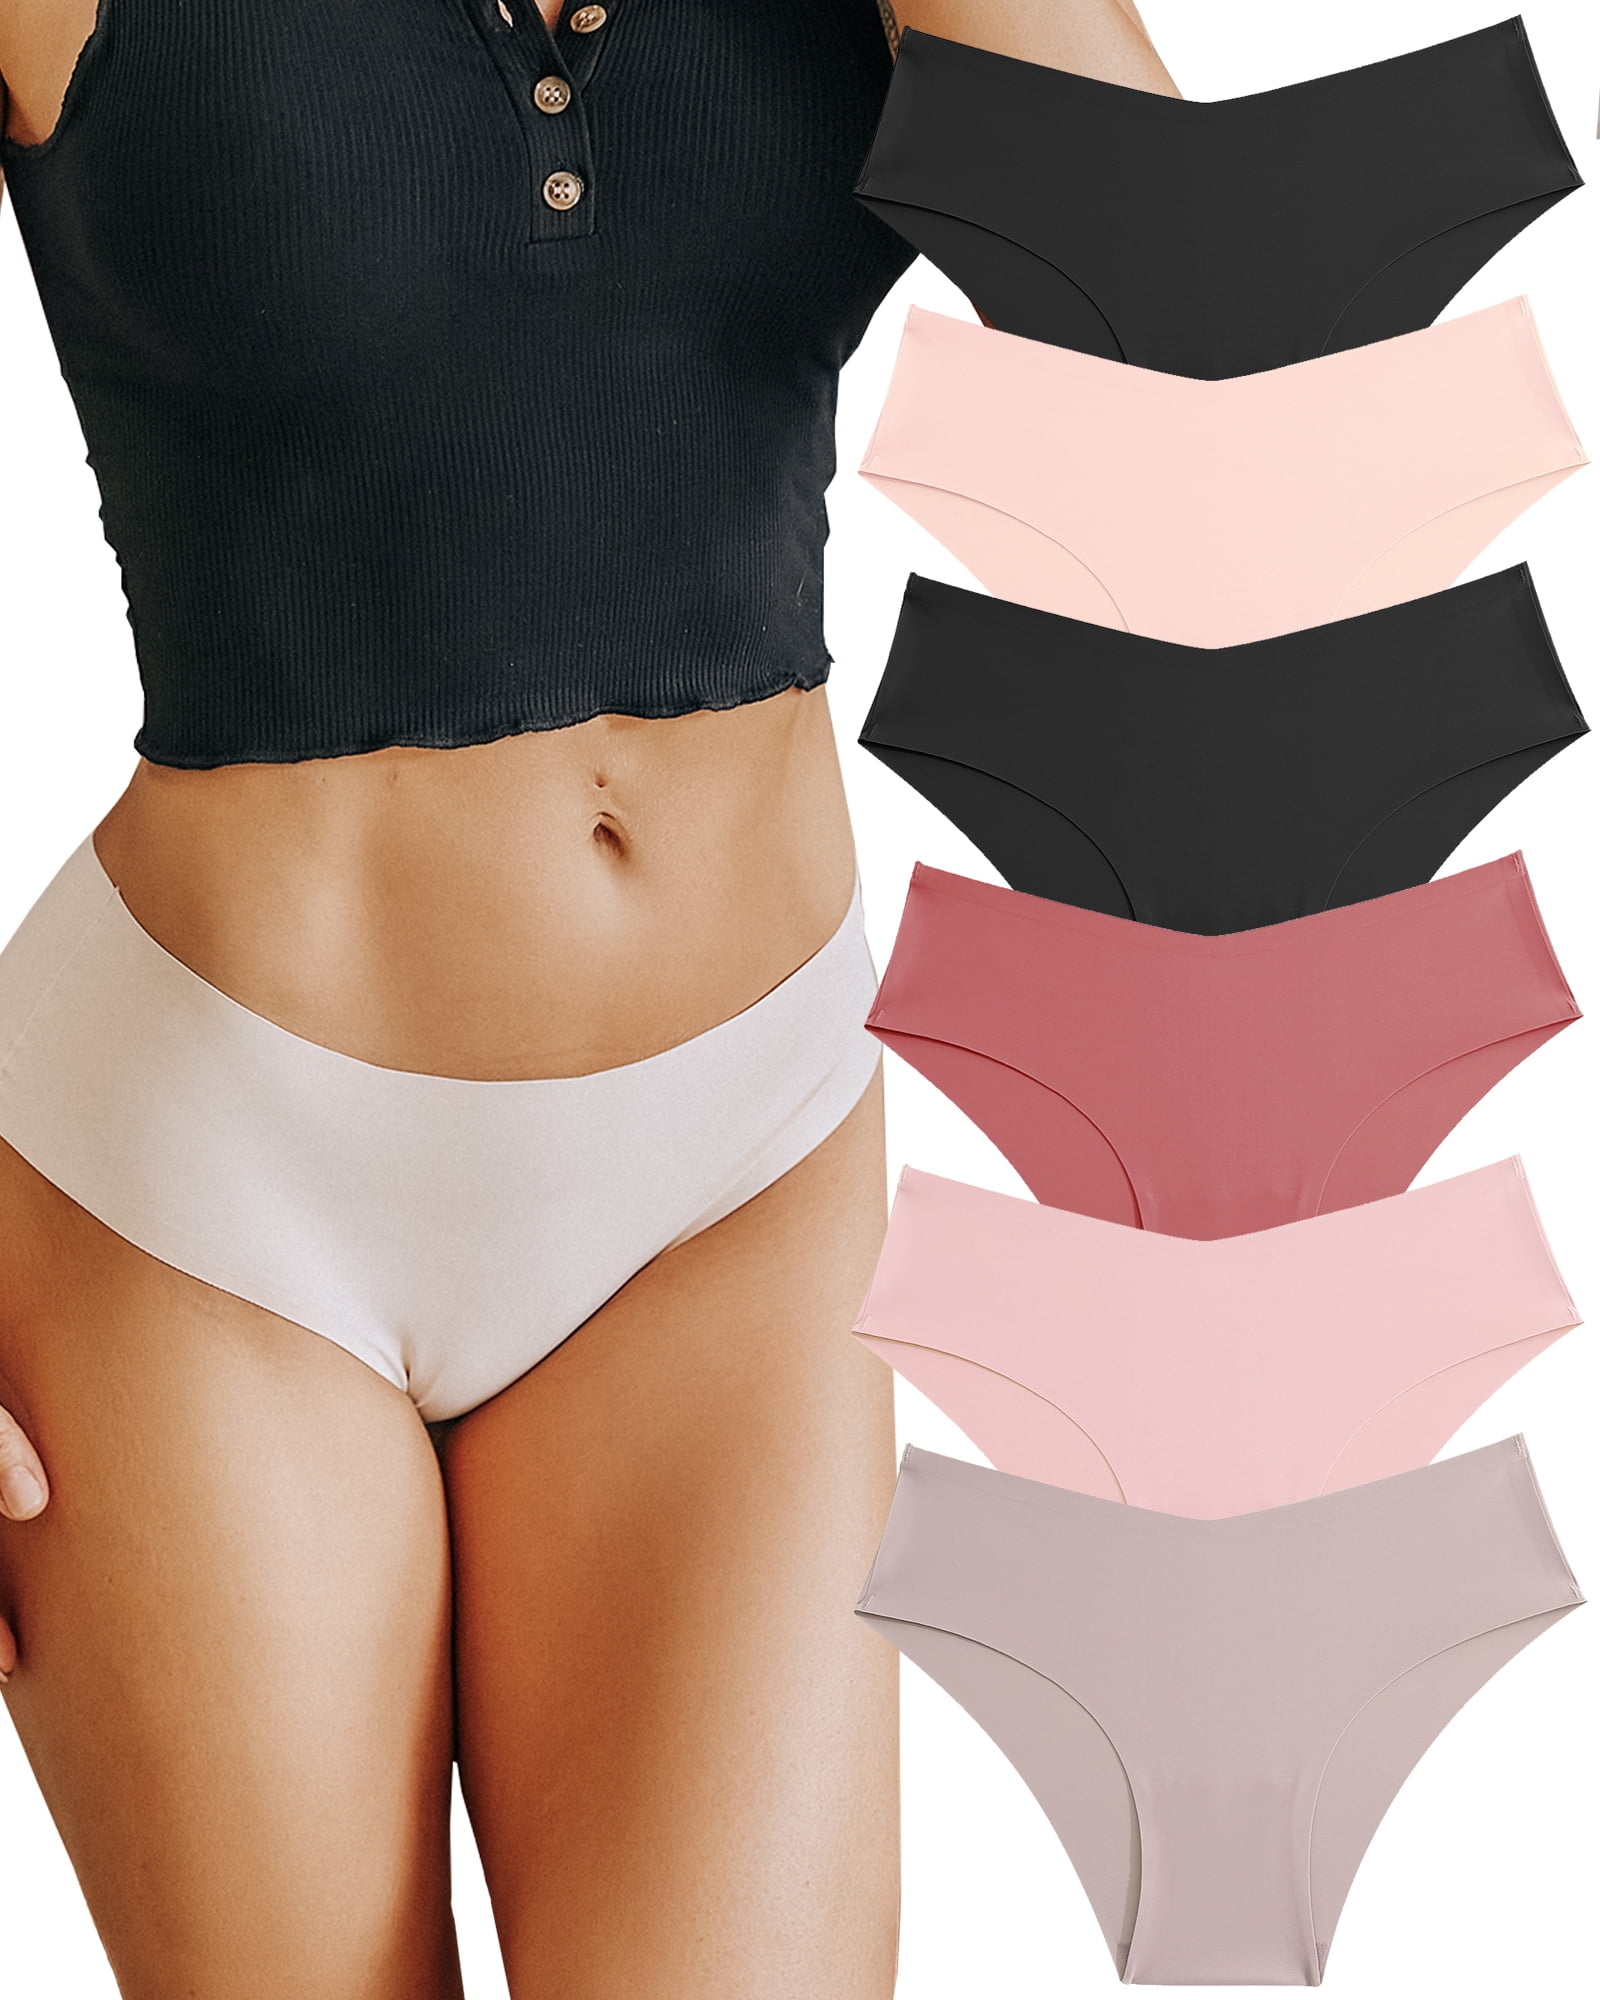 Finetoo 6 Pack Seamless Underwear For Women No Show Hipster Bikini Panties  Soft Stretch Invisibles Briefs cheeky XS-L 